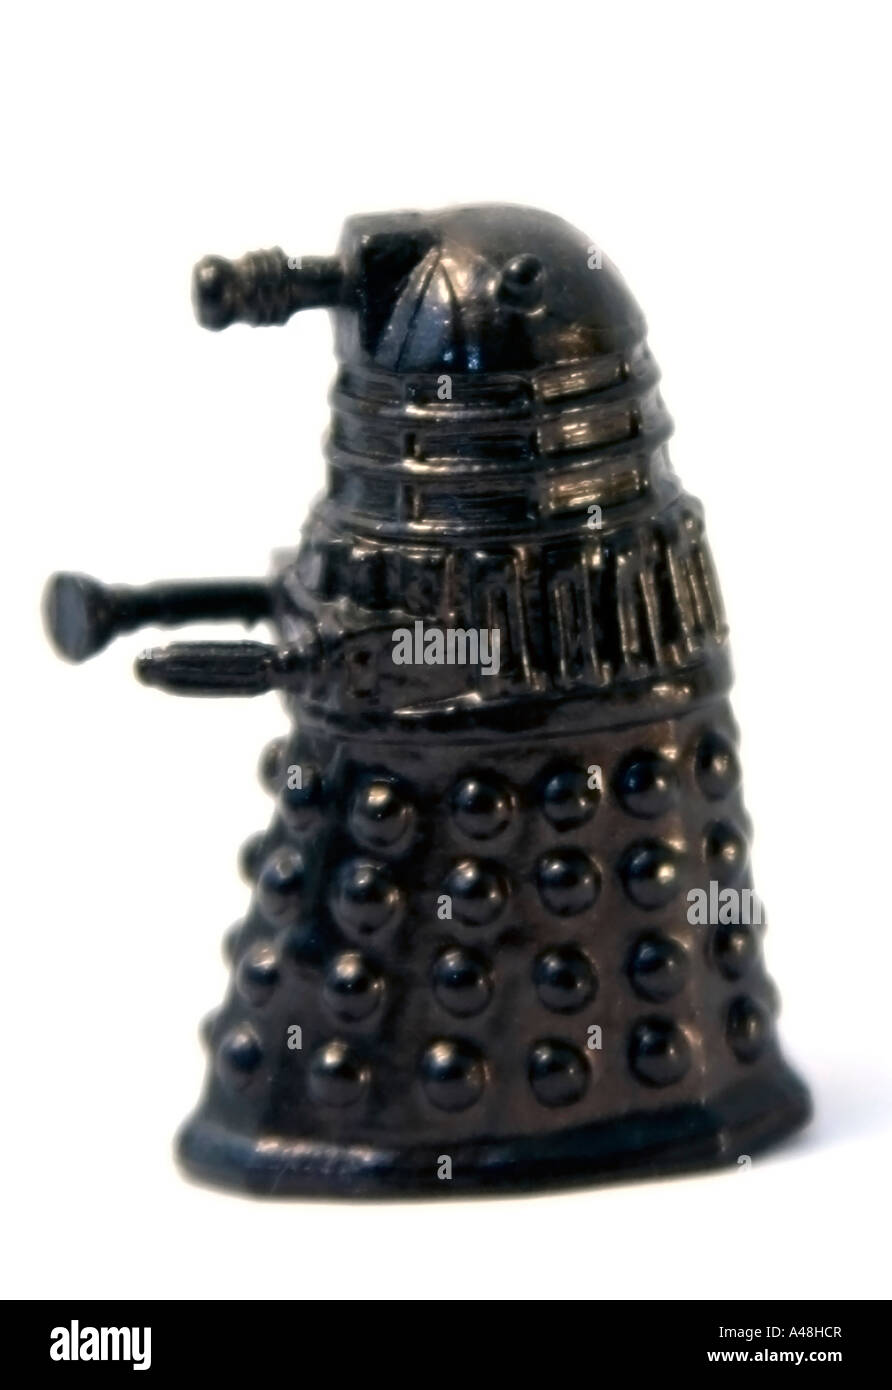 A model of a black Dalek against white background Stock Photo